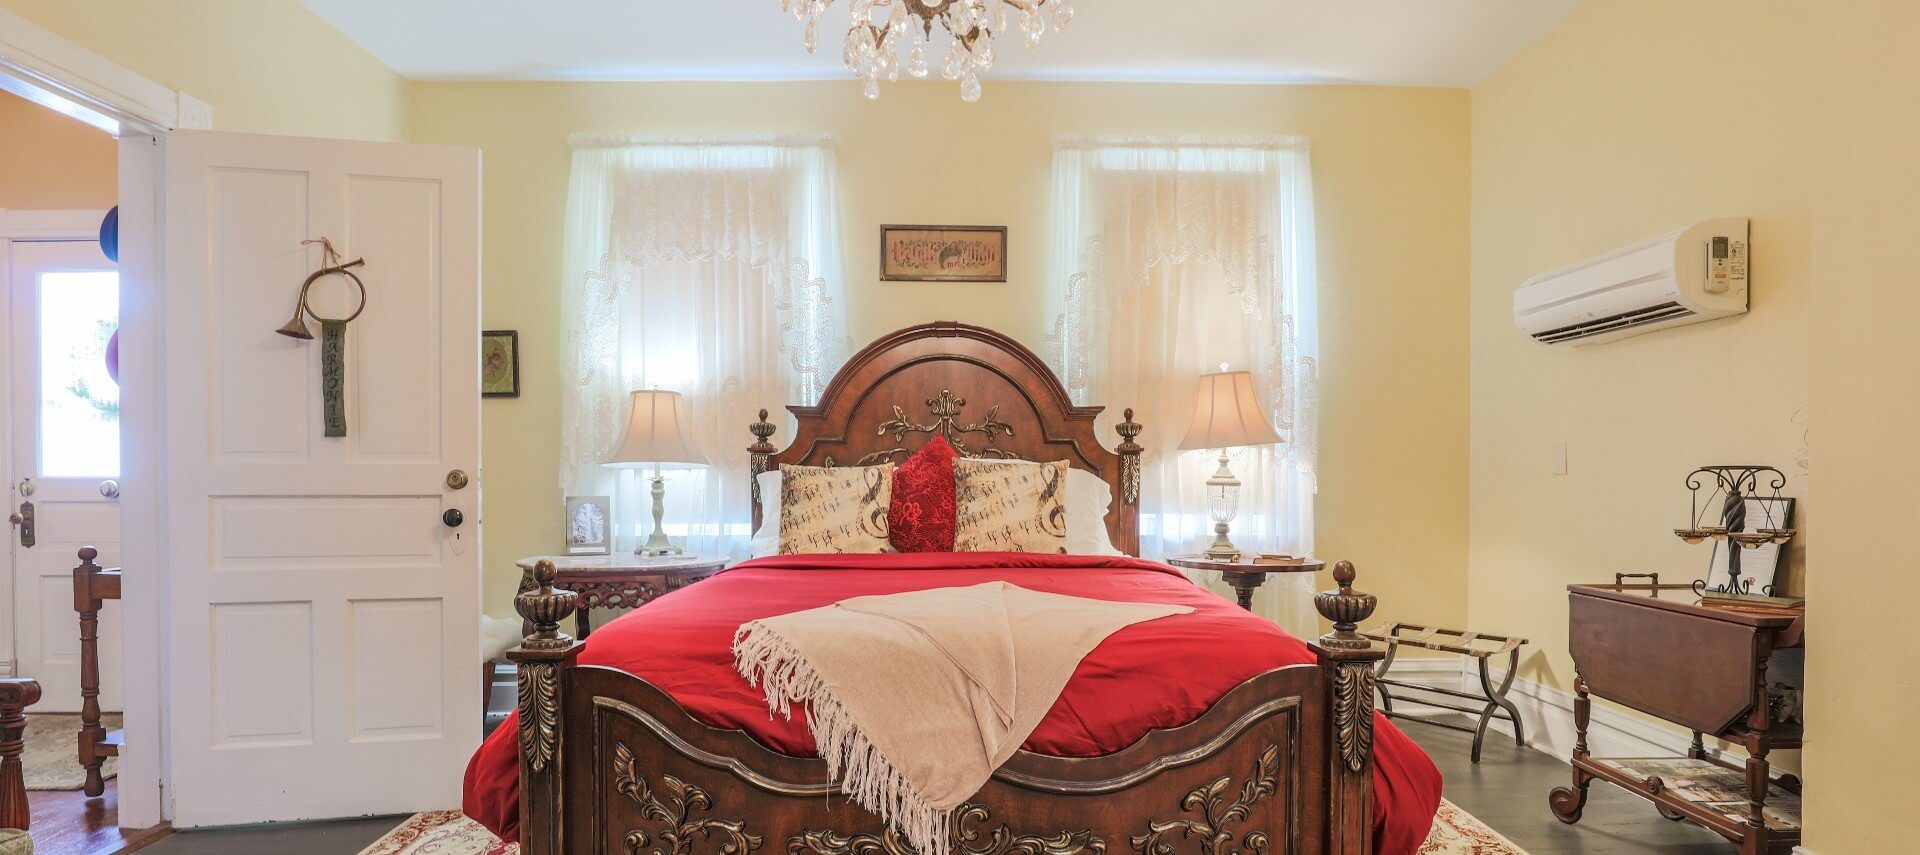 Bedroom with queen bed, antique headboard, red linens and two windows with white sheer curtains